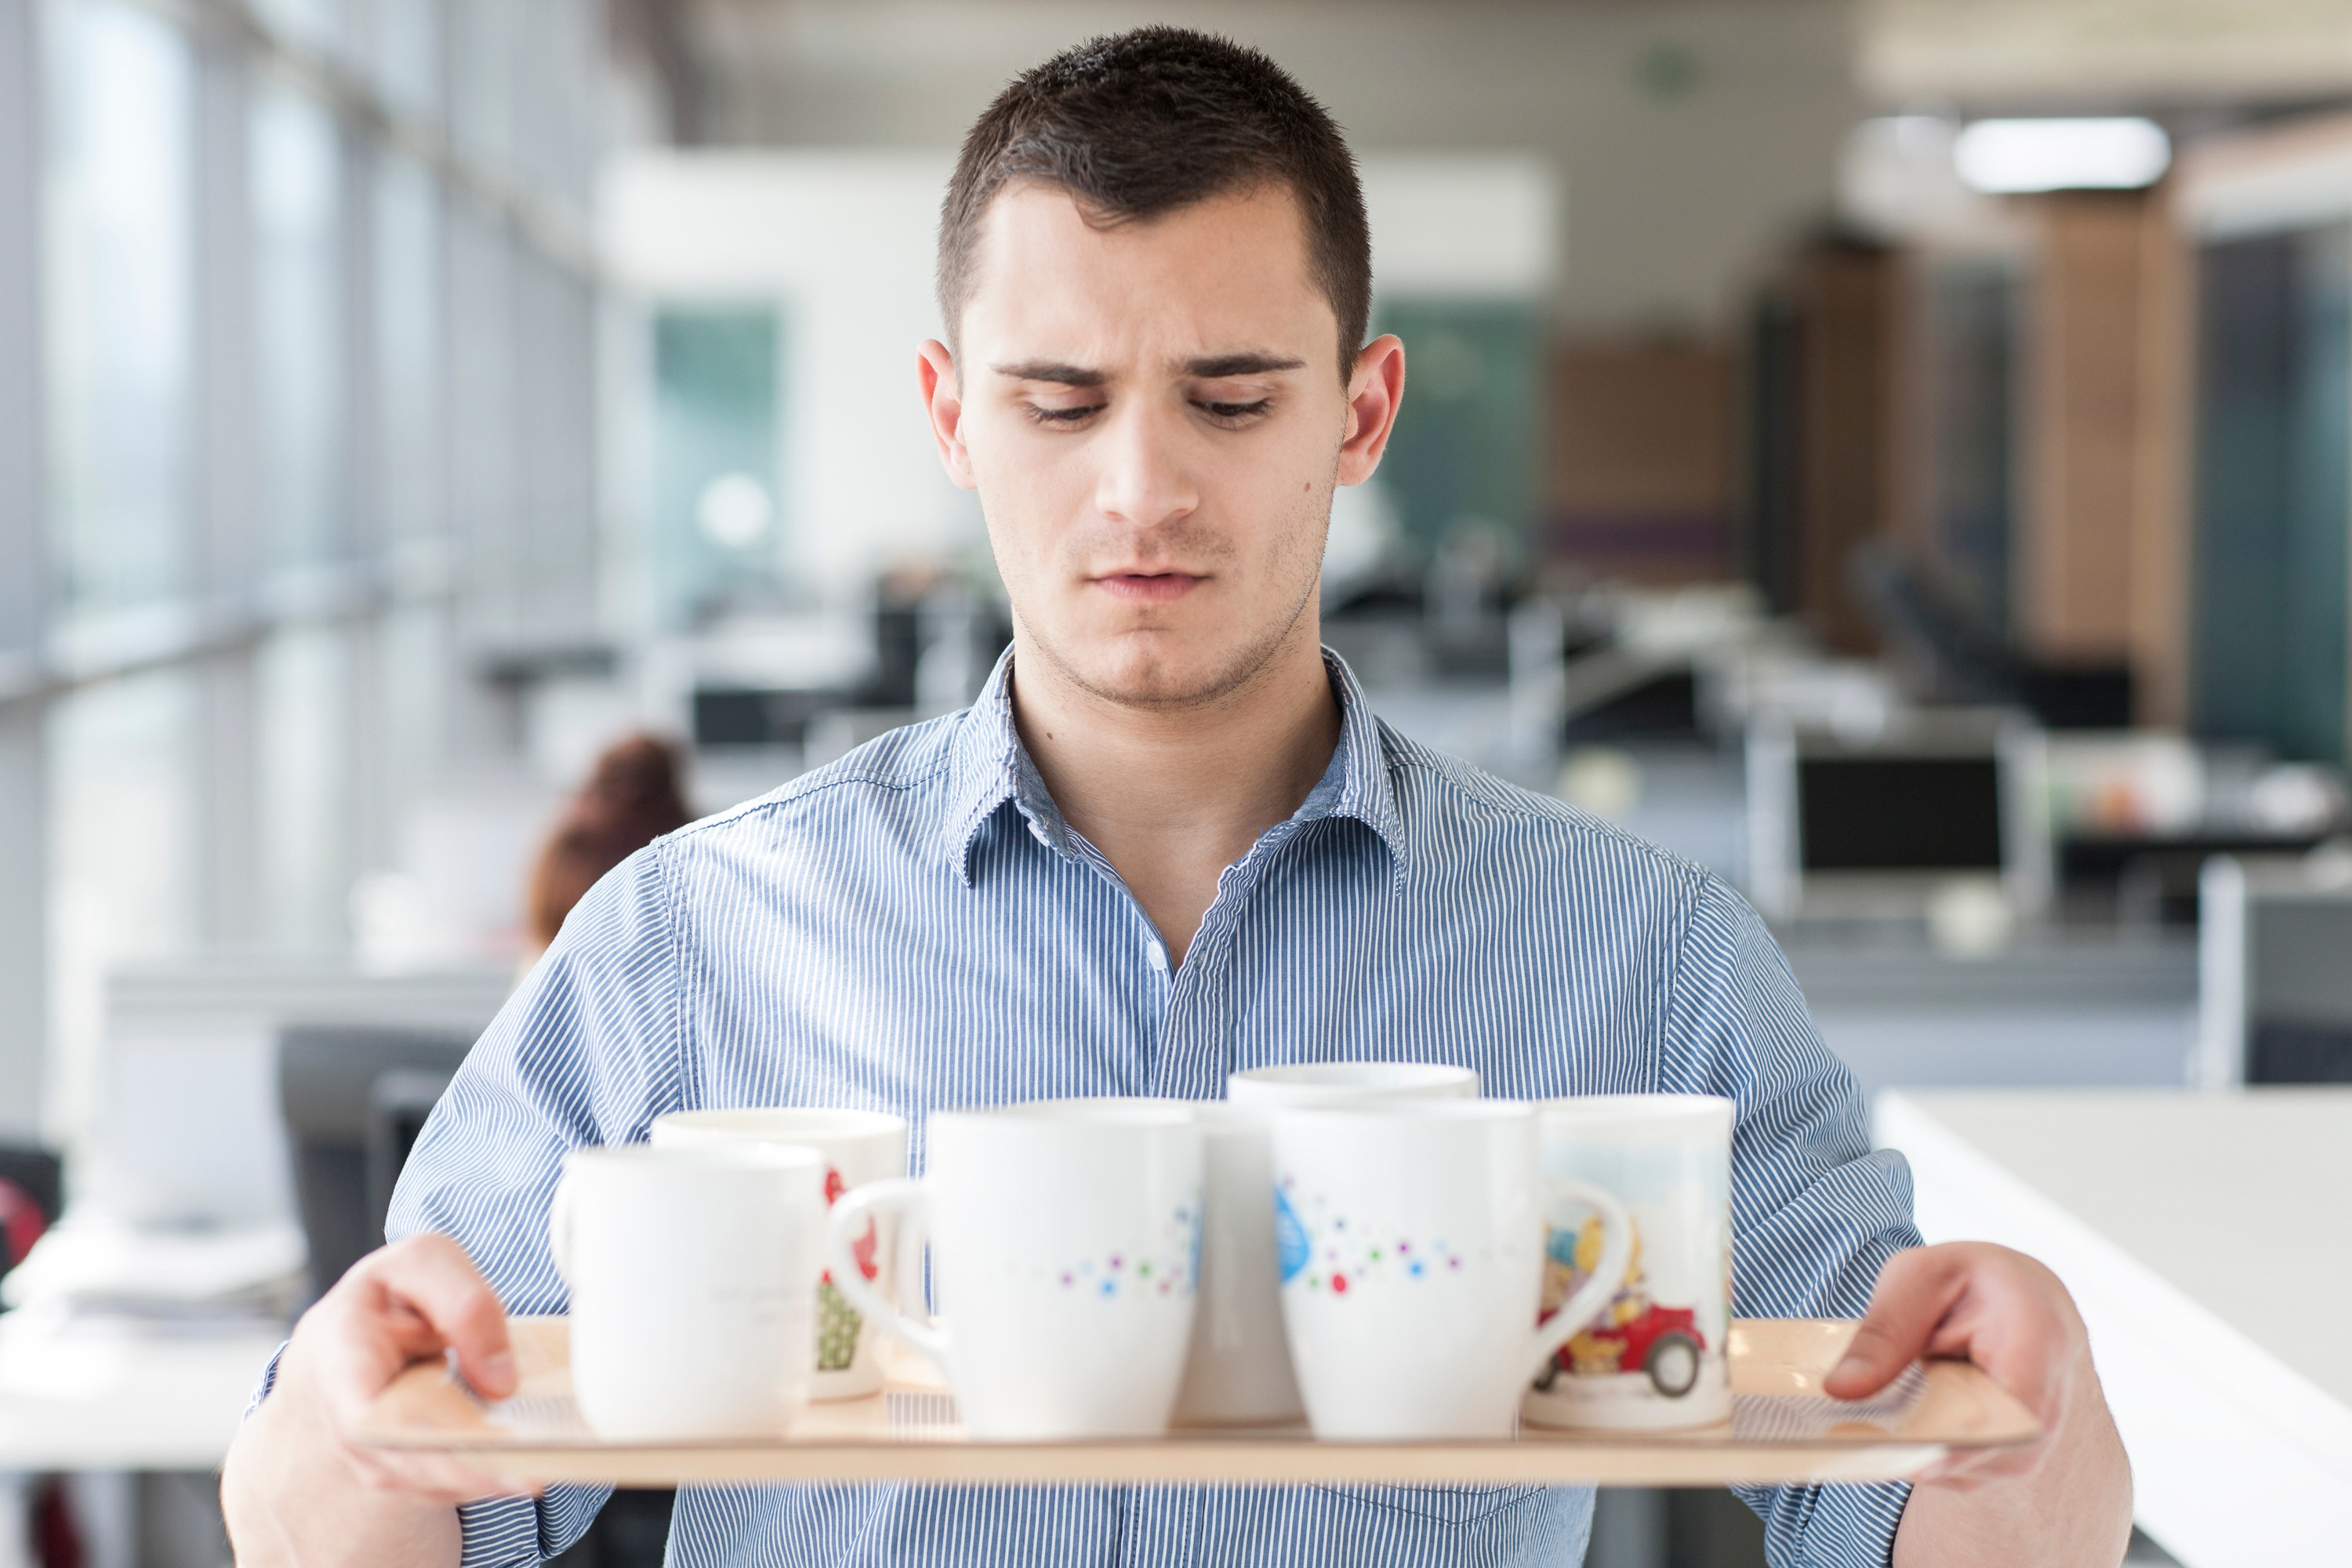 intern unhappily carries mugs